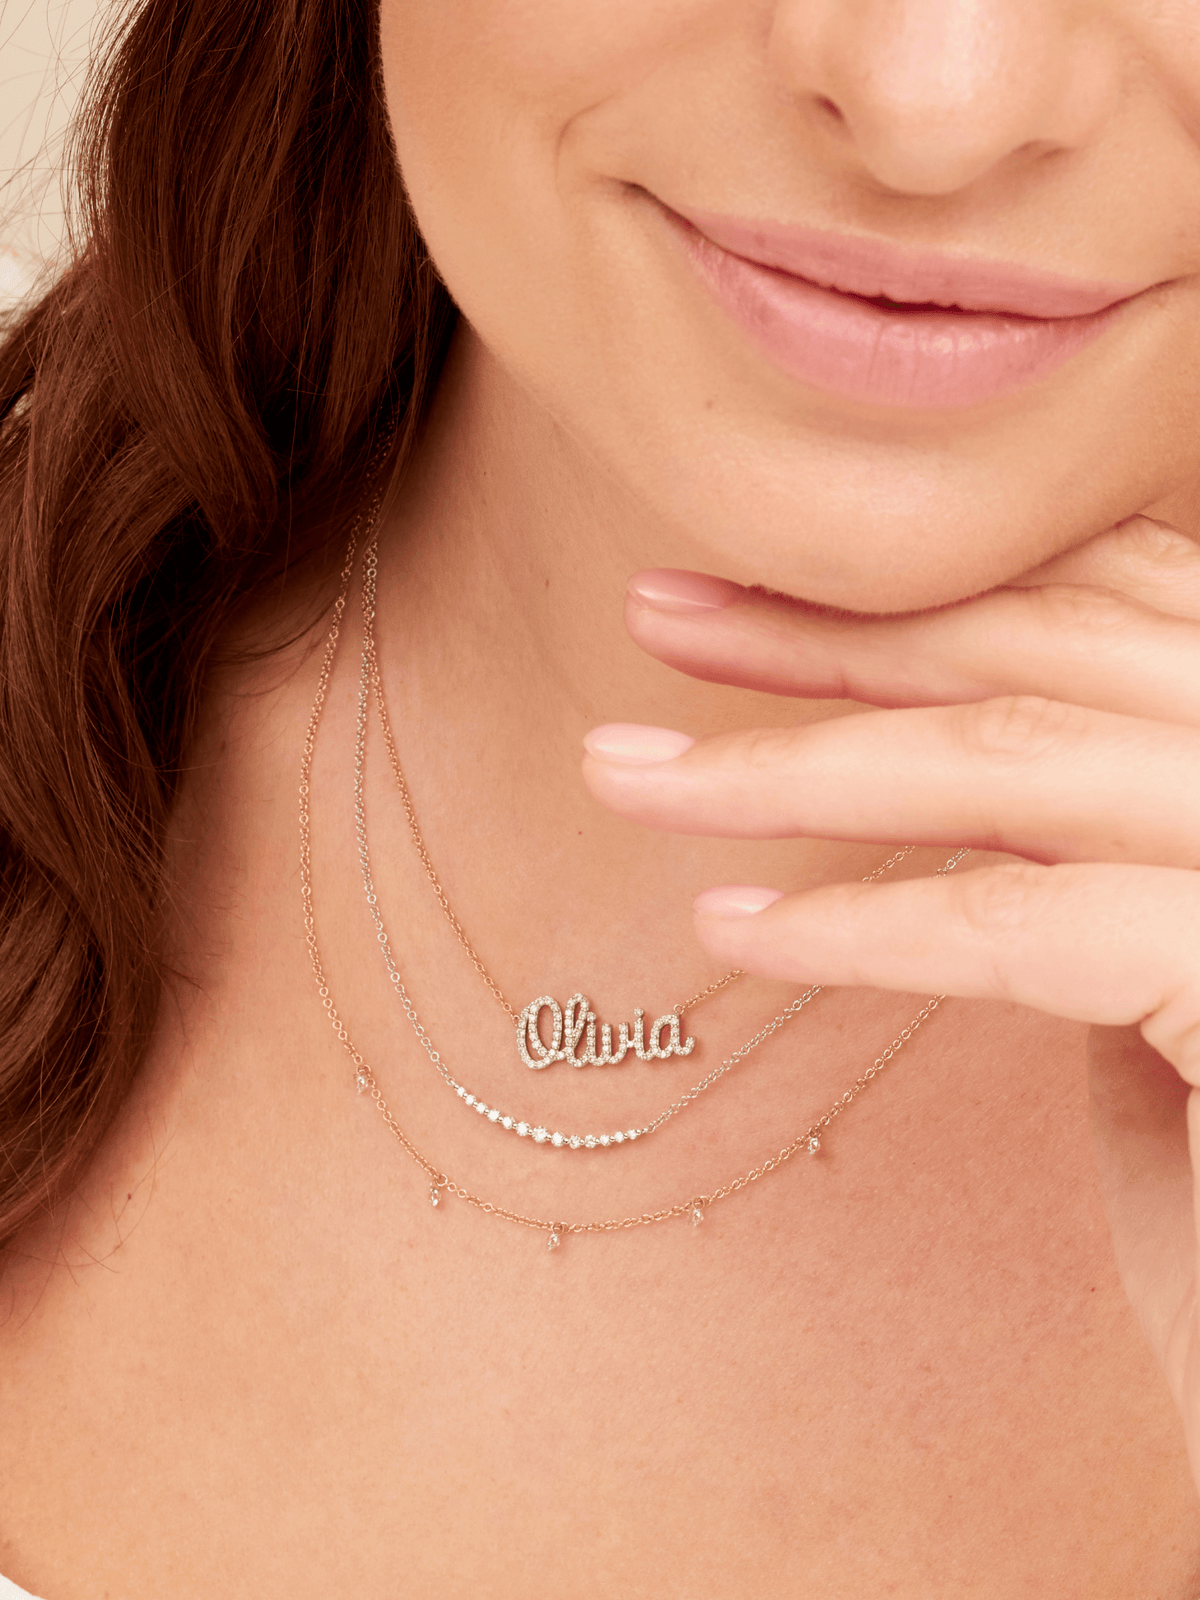 14K gold diamond name charm on dainty gold chain layered with white gold diamond chasing necklace and diamond drop layering necklace in yellow gold